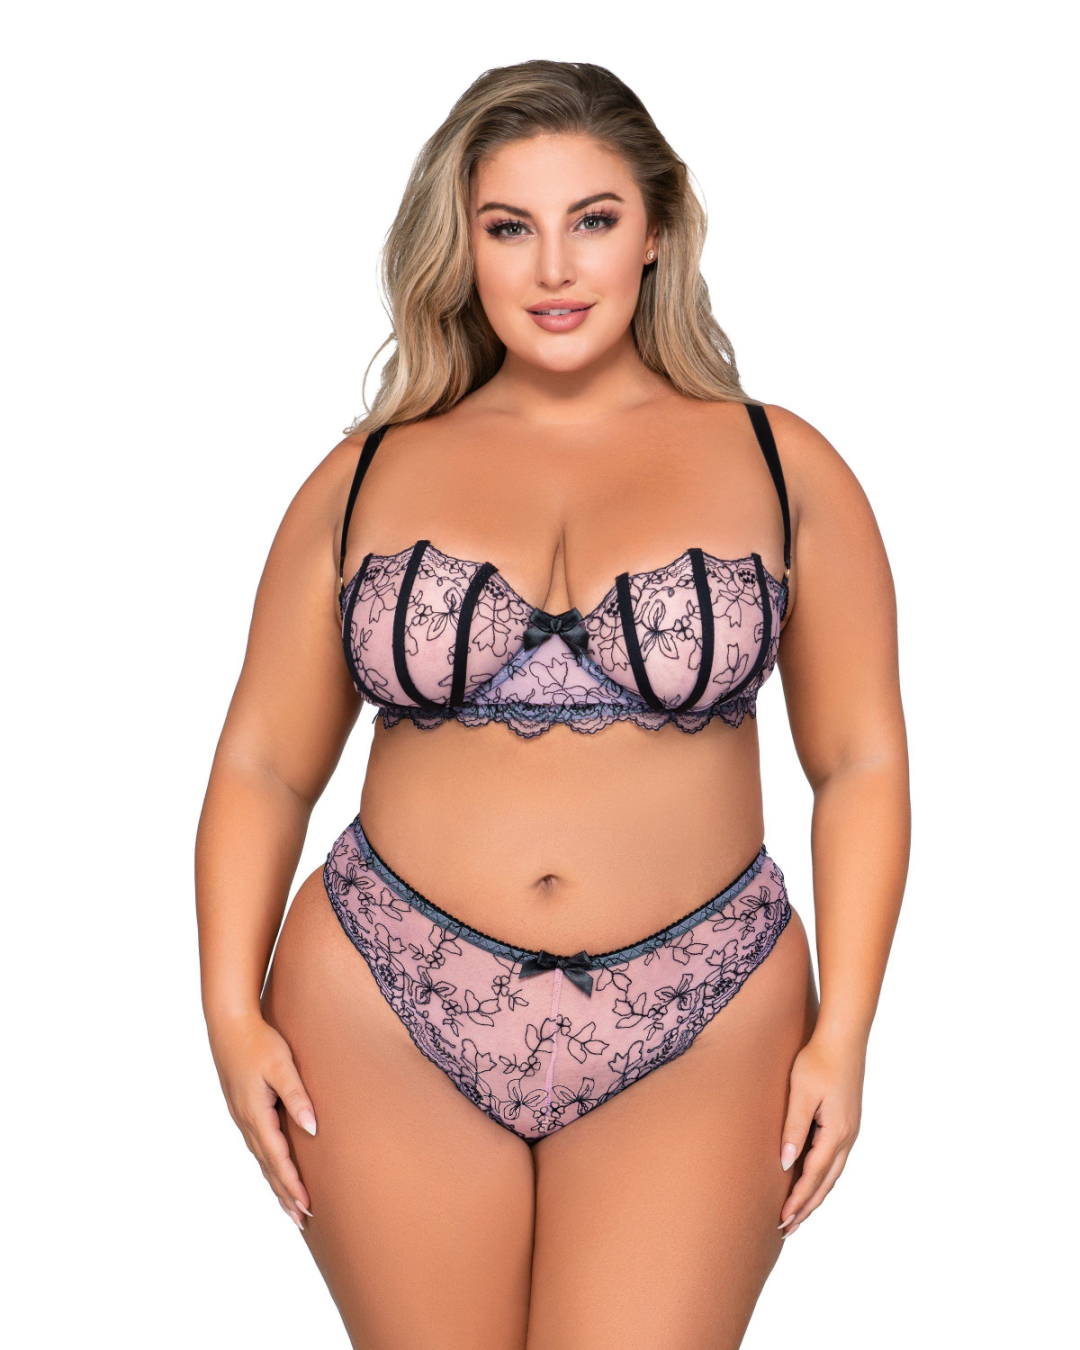 Front facing blonde model wearing Dreamgirl Lavender Shell Bra and Matching G-string Set xl - 3x